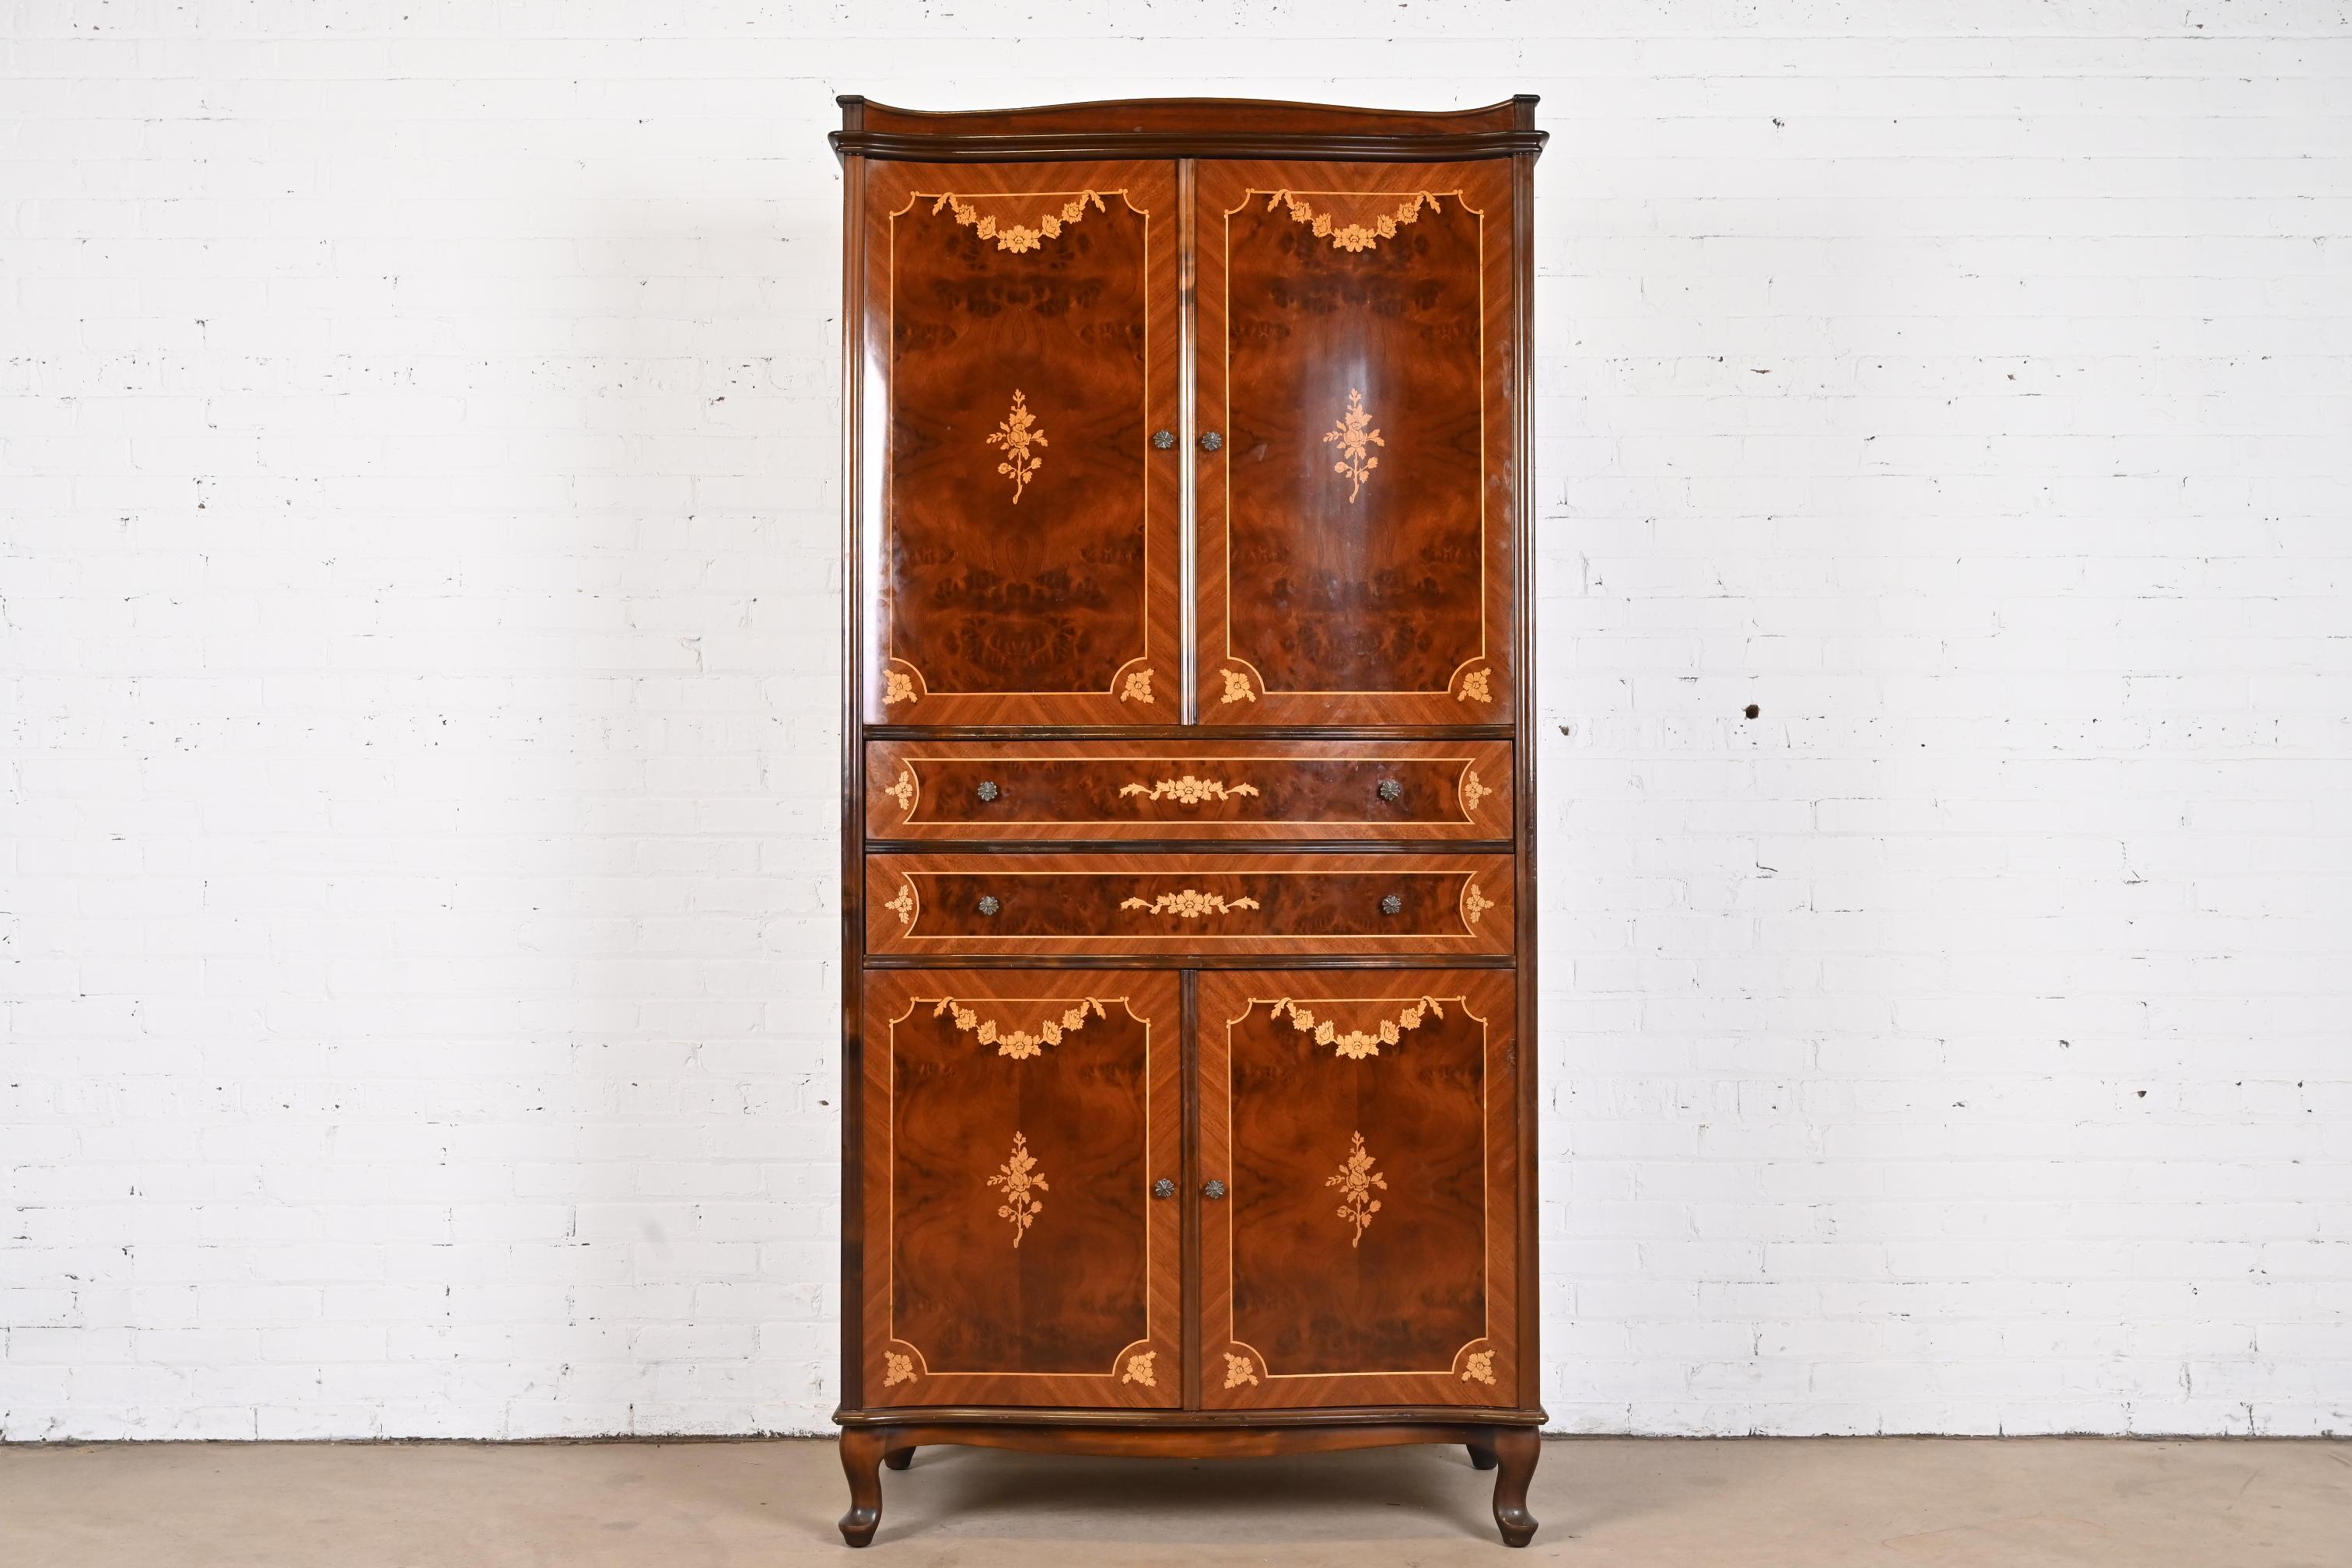 A gorgeous French Continental style armoire dresser or gentleman's chest

In the style of Jules Leleu

Hungary, circa 1940s

Book-matched burled mahogany, with satinwood string inlay and floral marquetry, and original brass